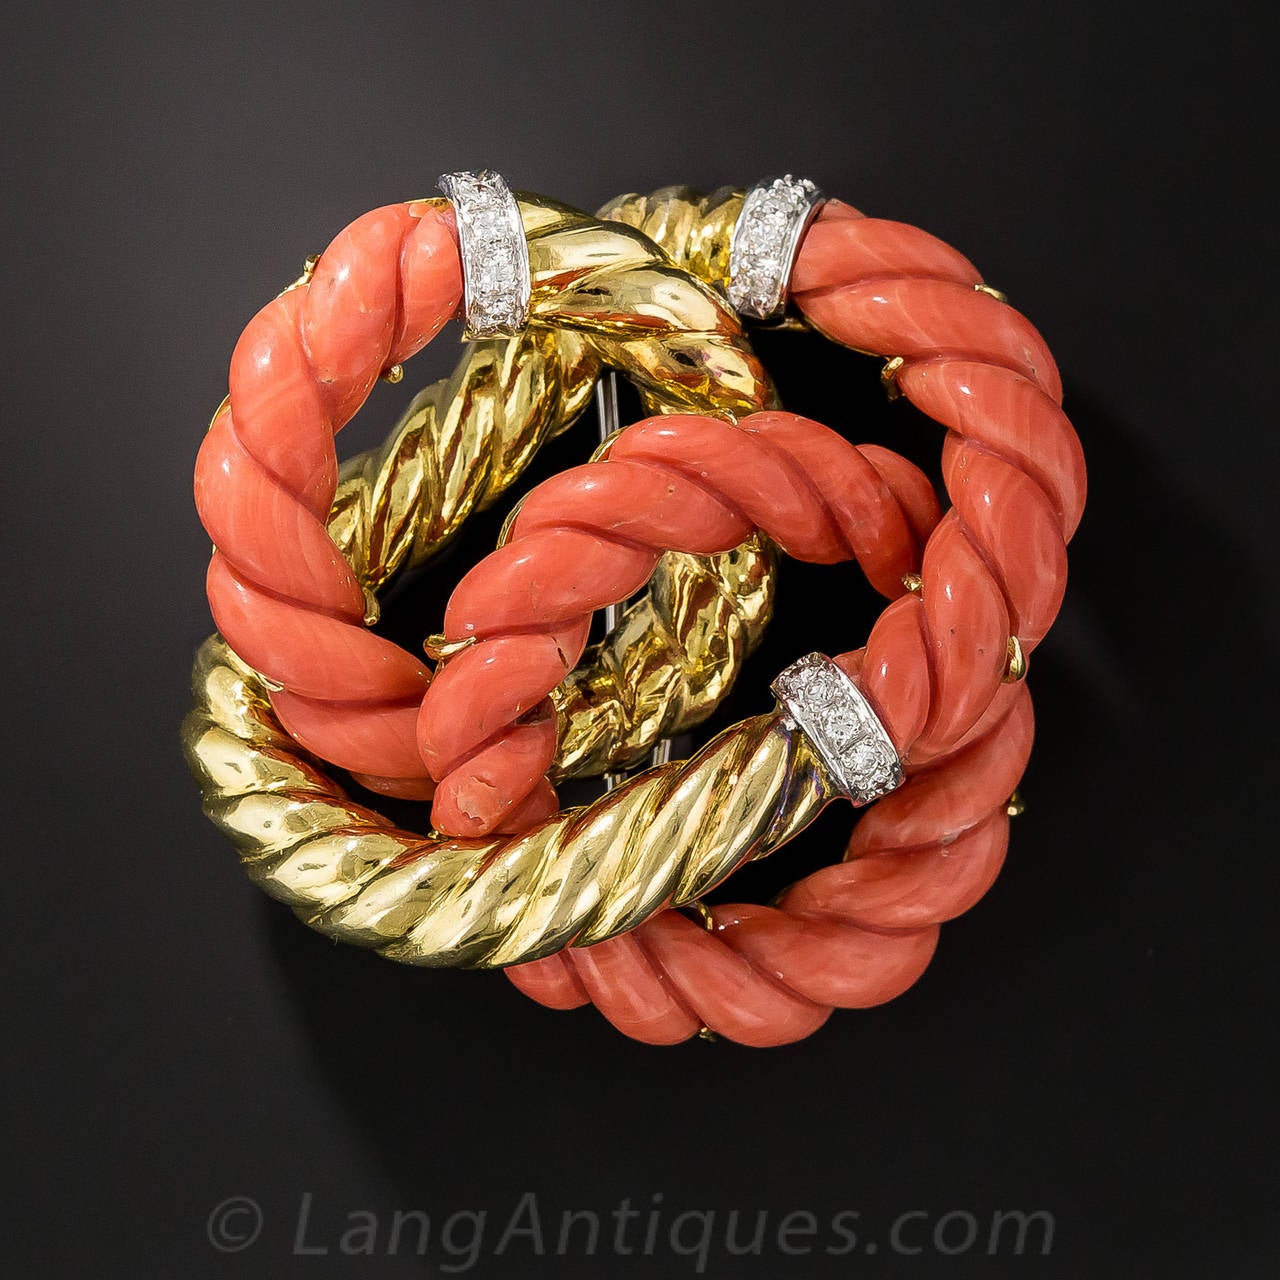 A trio of braided wreaths, composed of gleaming 18K yellow gold, natural orangey-salmon, handcarved coral and sparkling diamond bands, embrace to create this exceptional and very festive and wearable multidimensional sculpture. This ravishing and